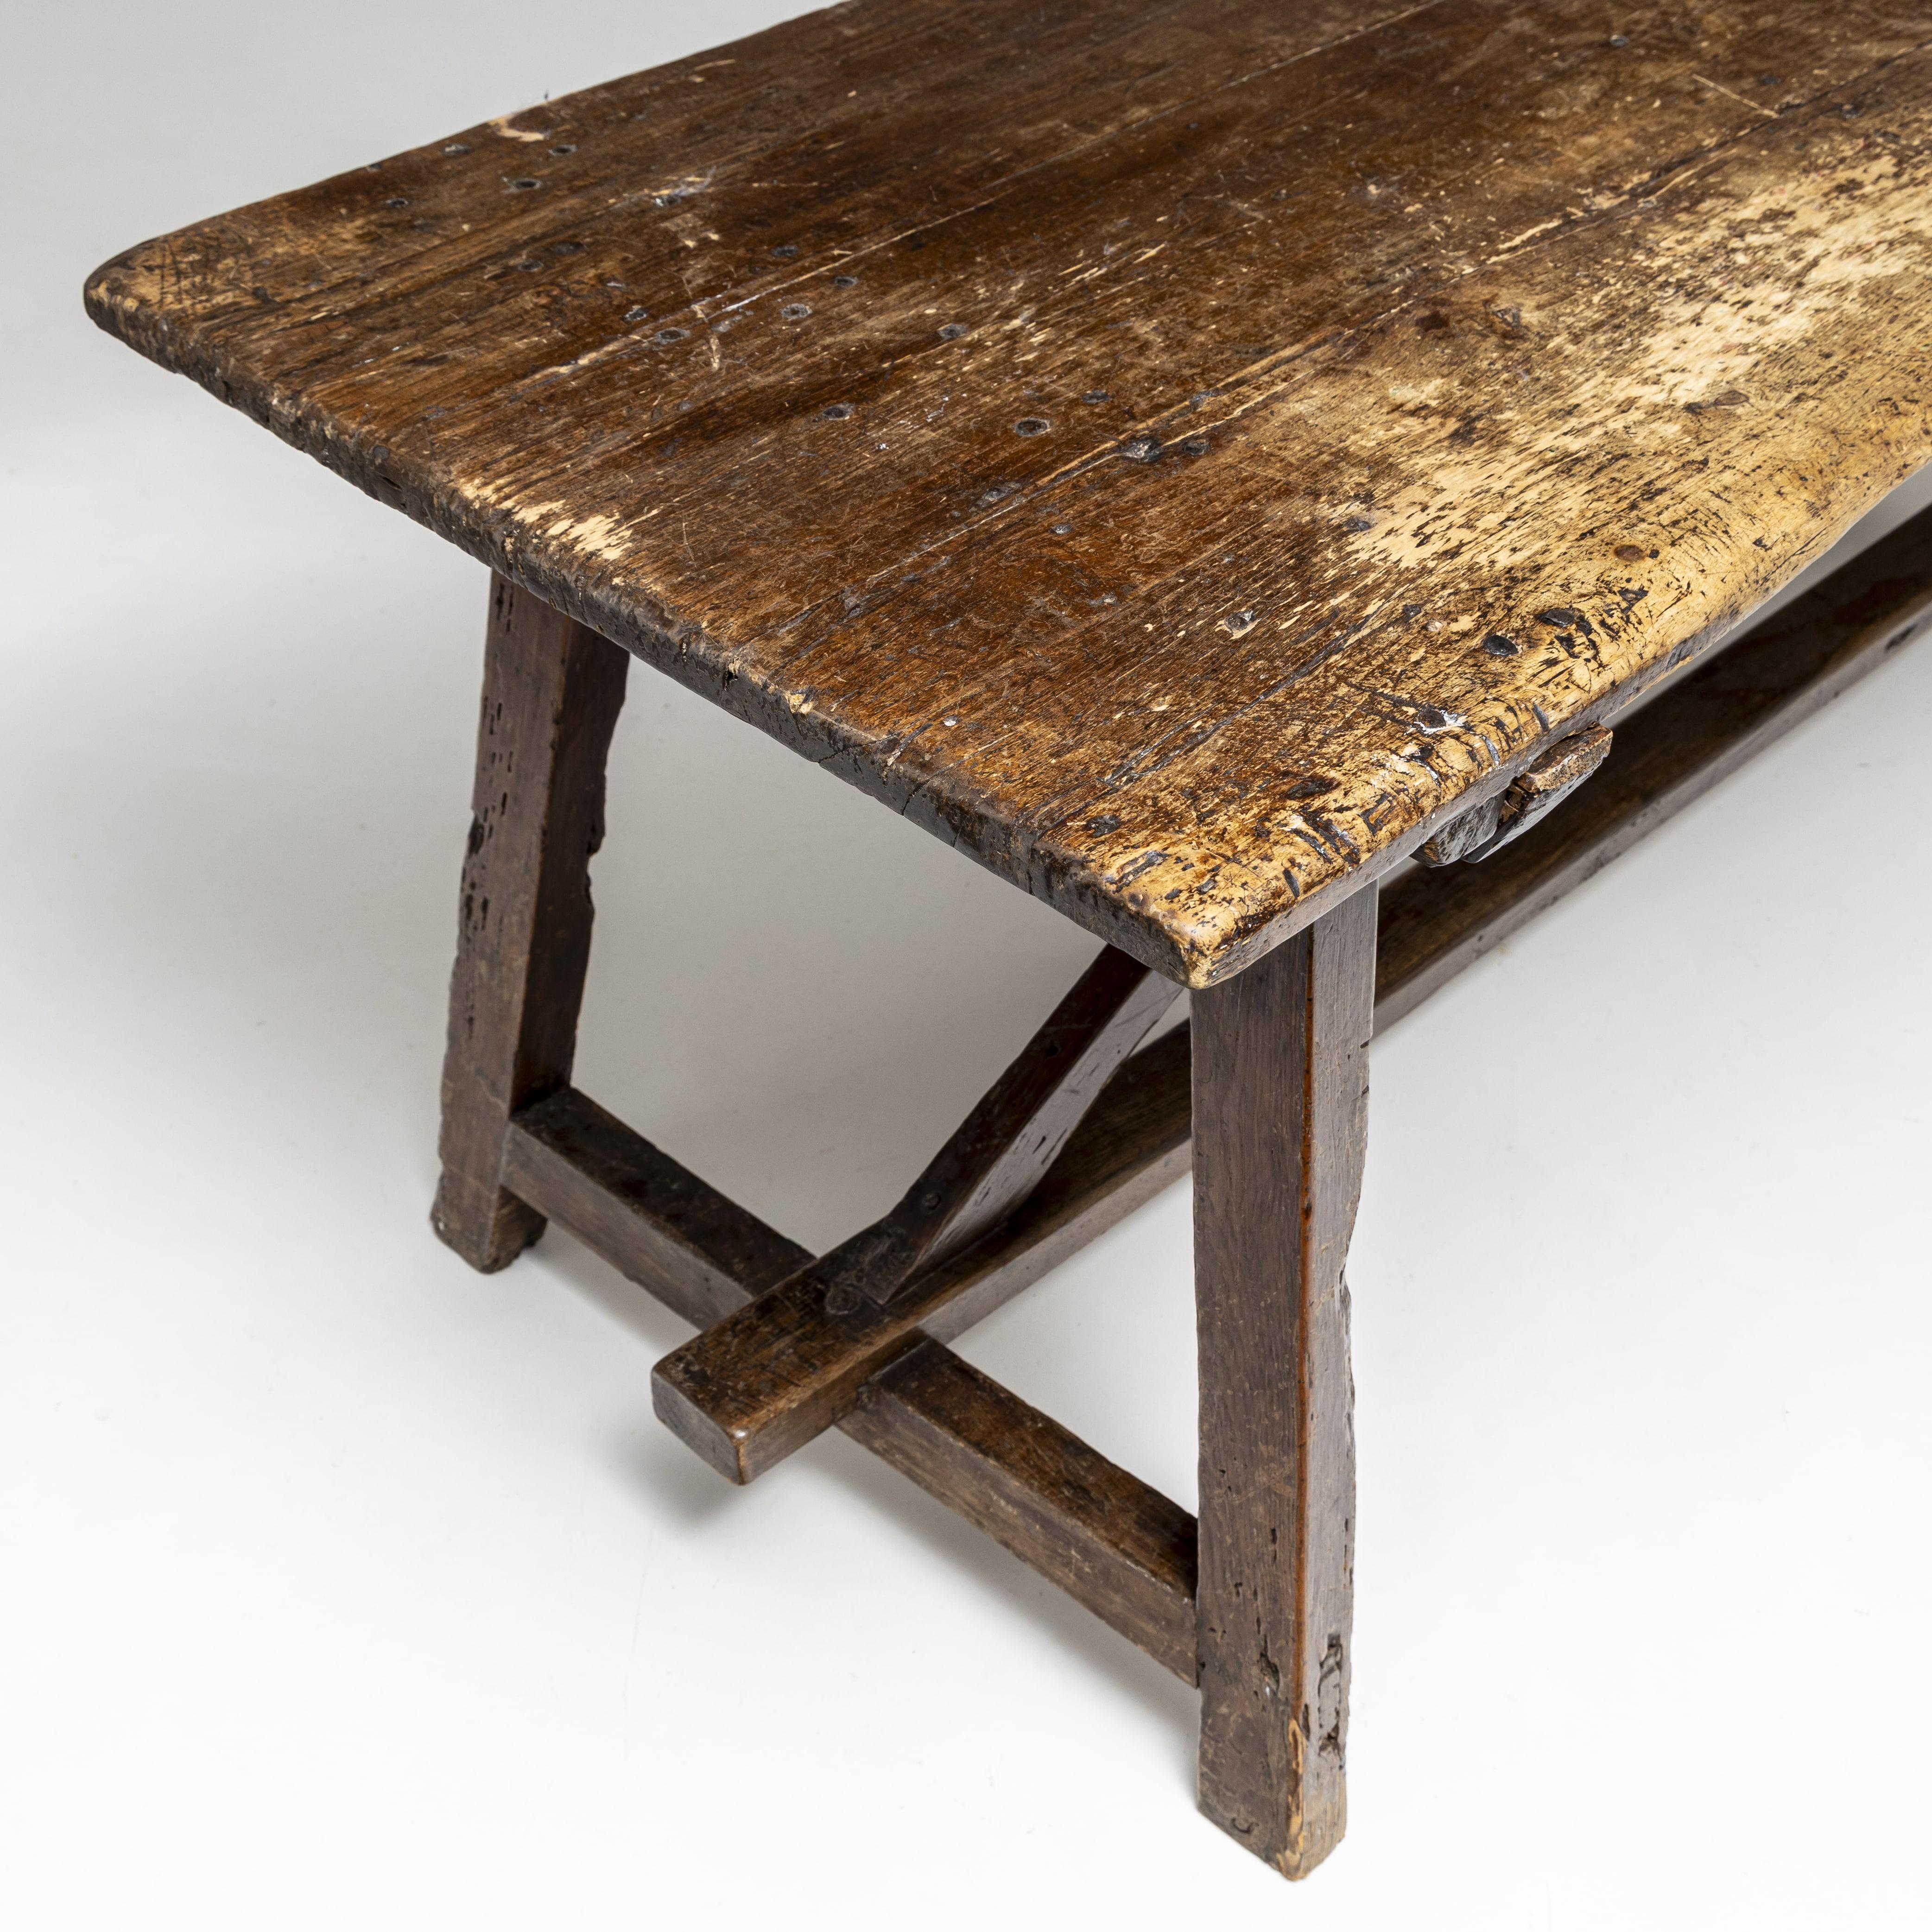 Large rustic dining table or work table made of solid pine with a central bar and strong, decorative patina.